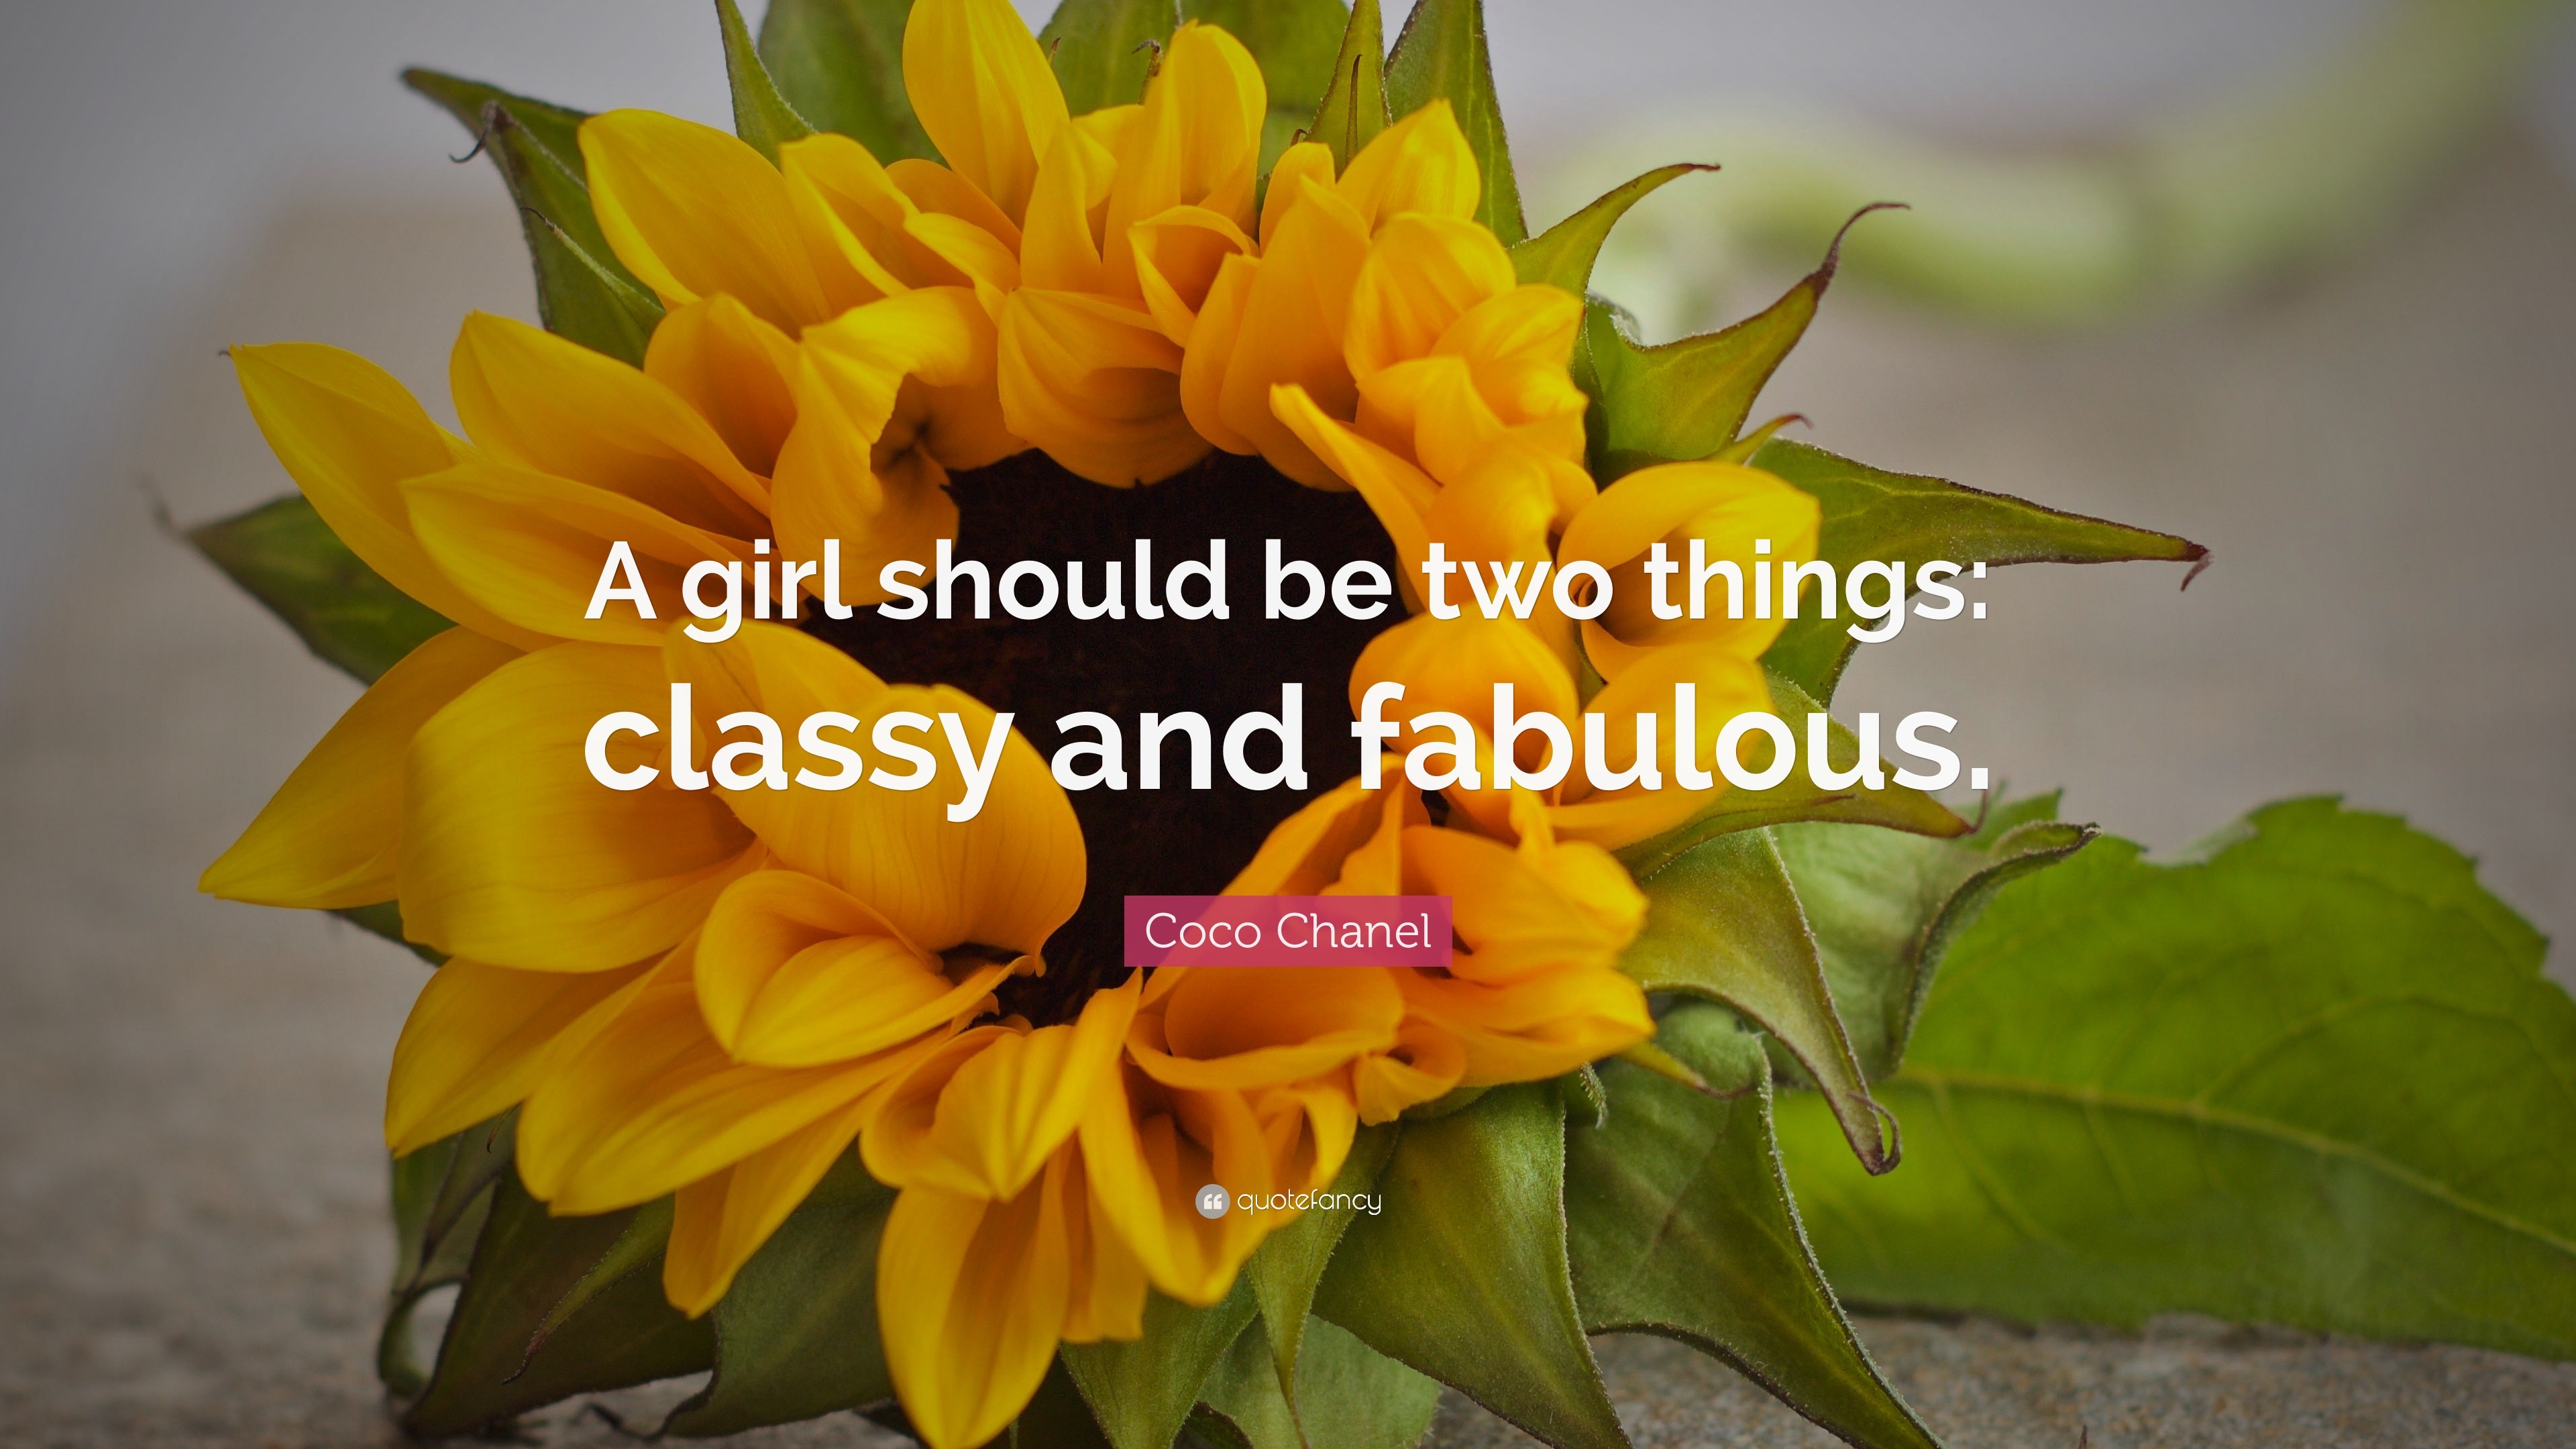 Coco Chanel Quote: “A girl should be two things: classy and fabulous.”